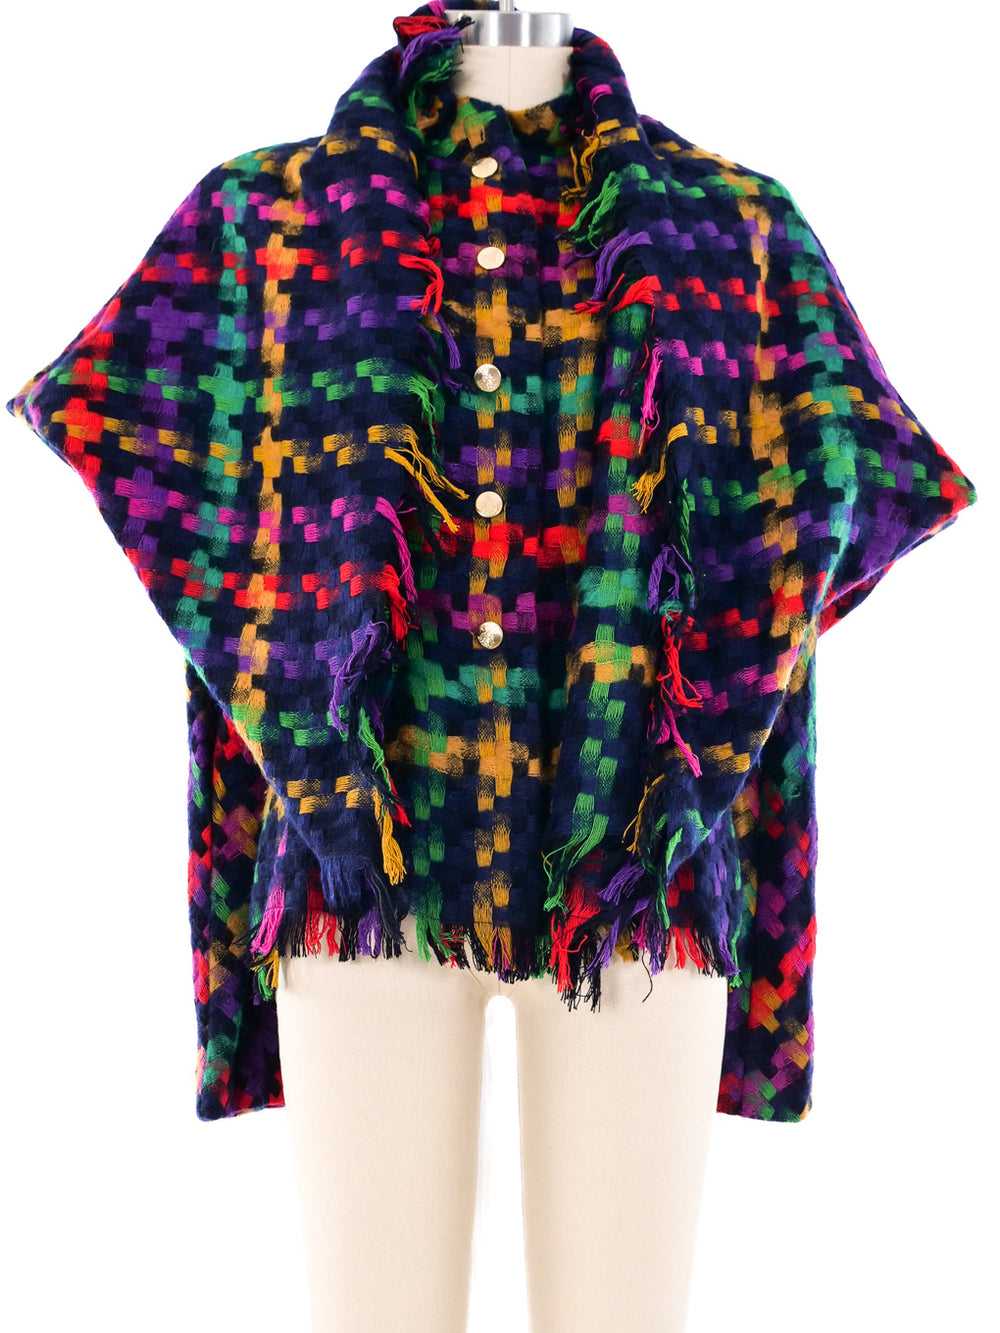 Pauline Trigere Woven Blazer with Scarf - image 7